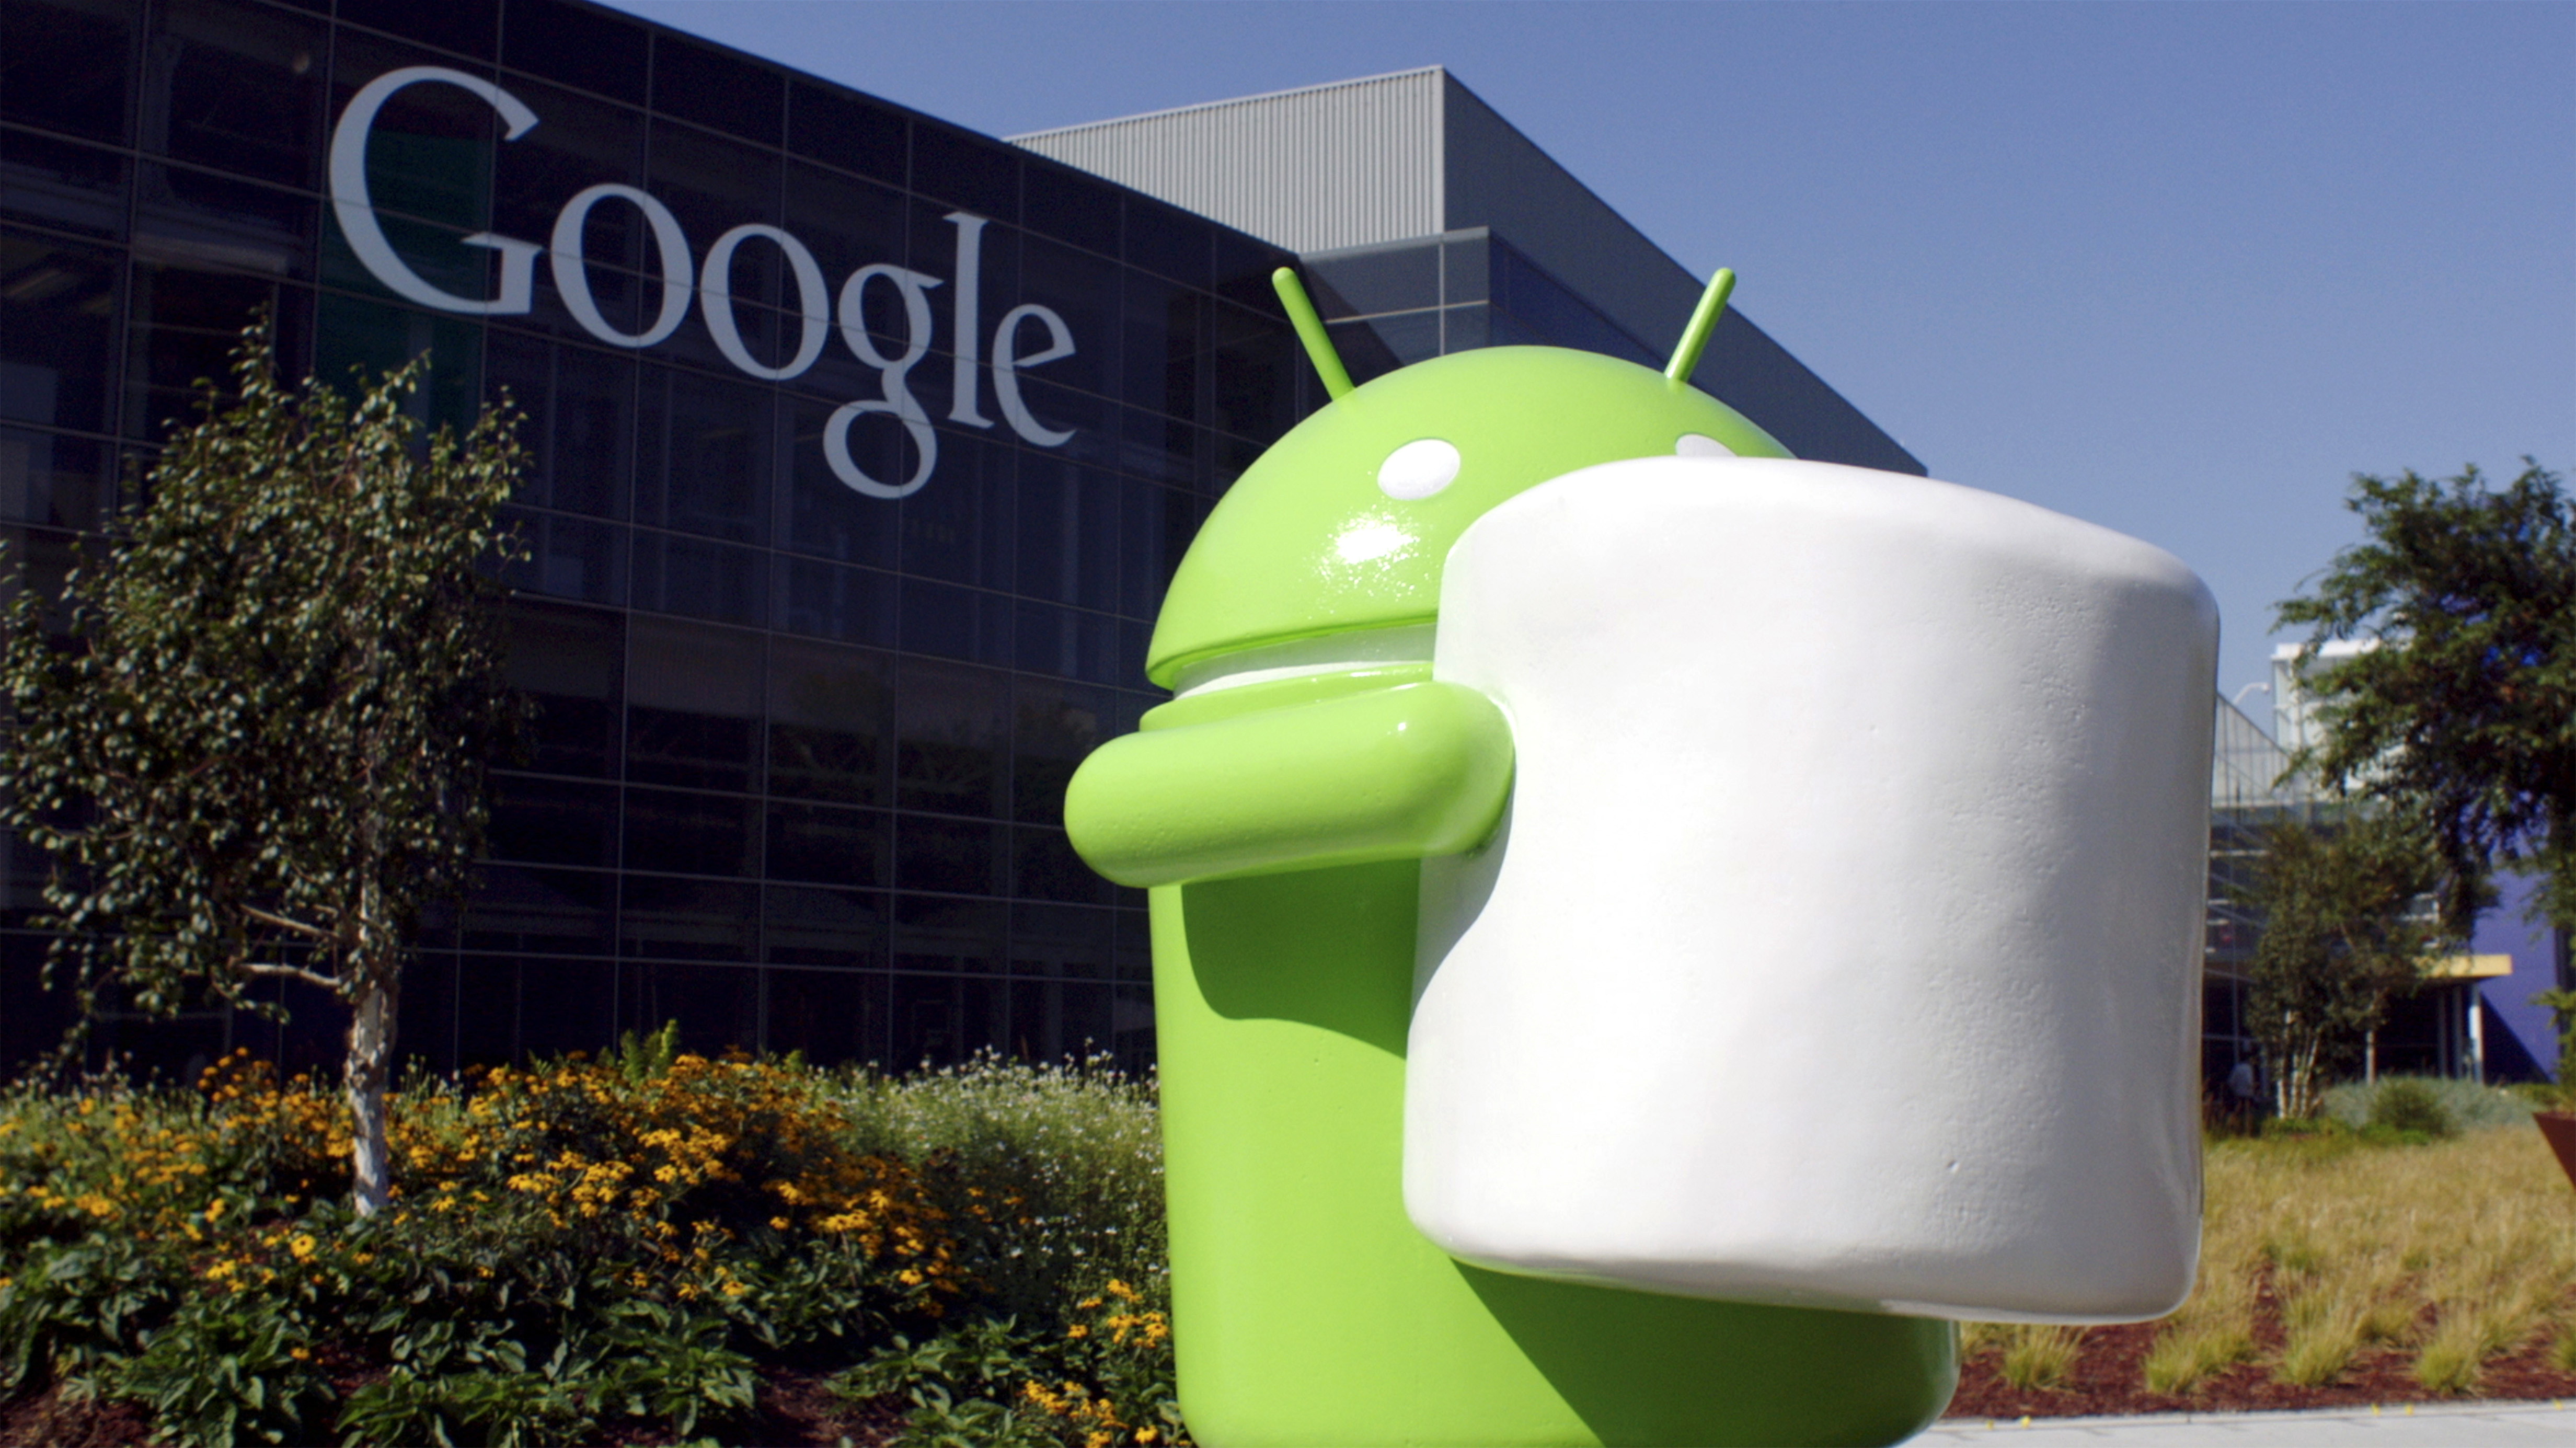 EU wants Google to stop anti-competitive Android practices, fine expected